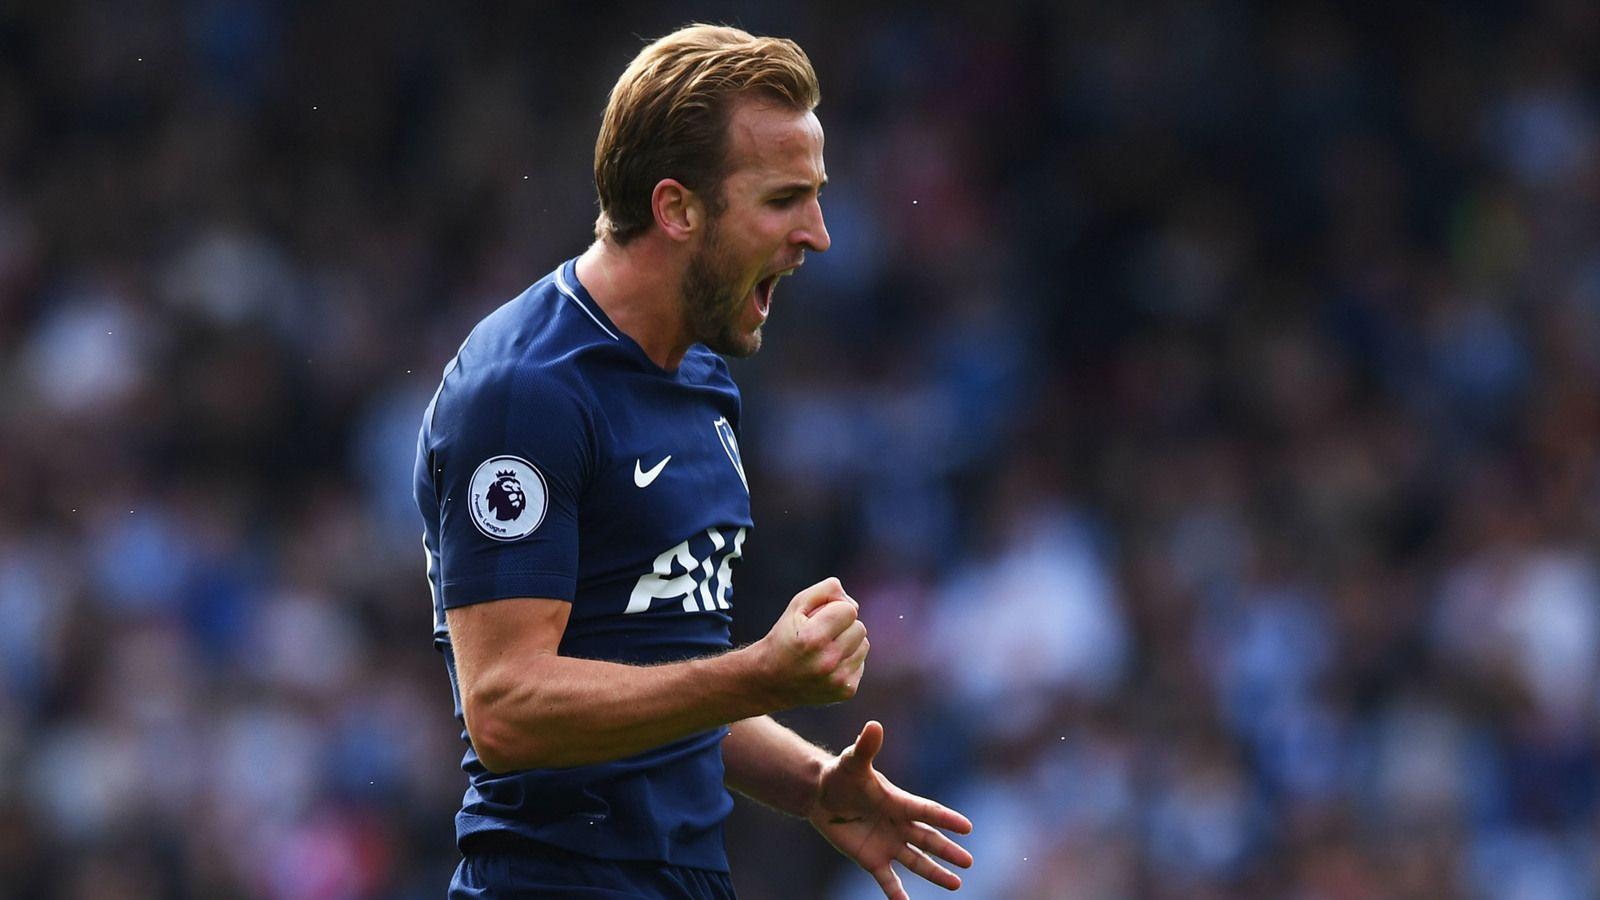 England selects Harry Kane as World Cup captain Sports News